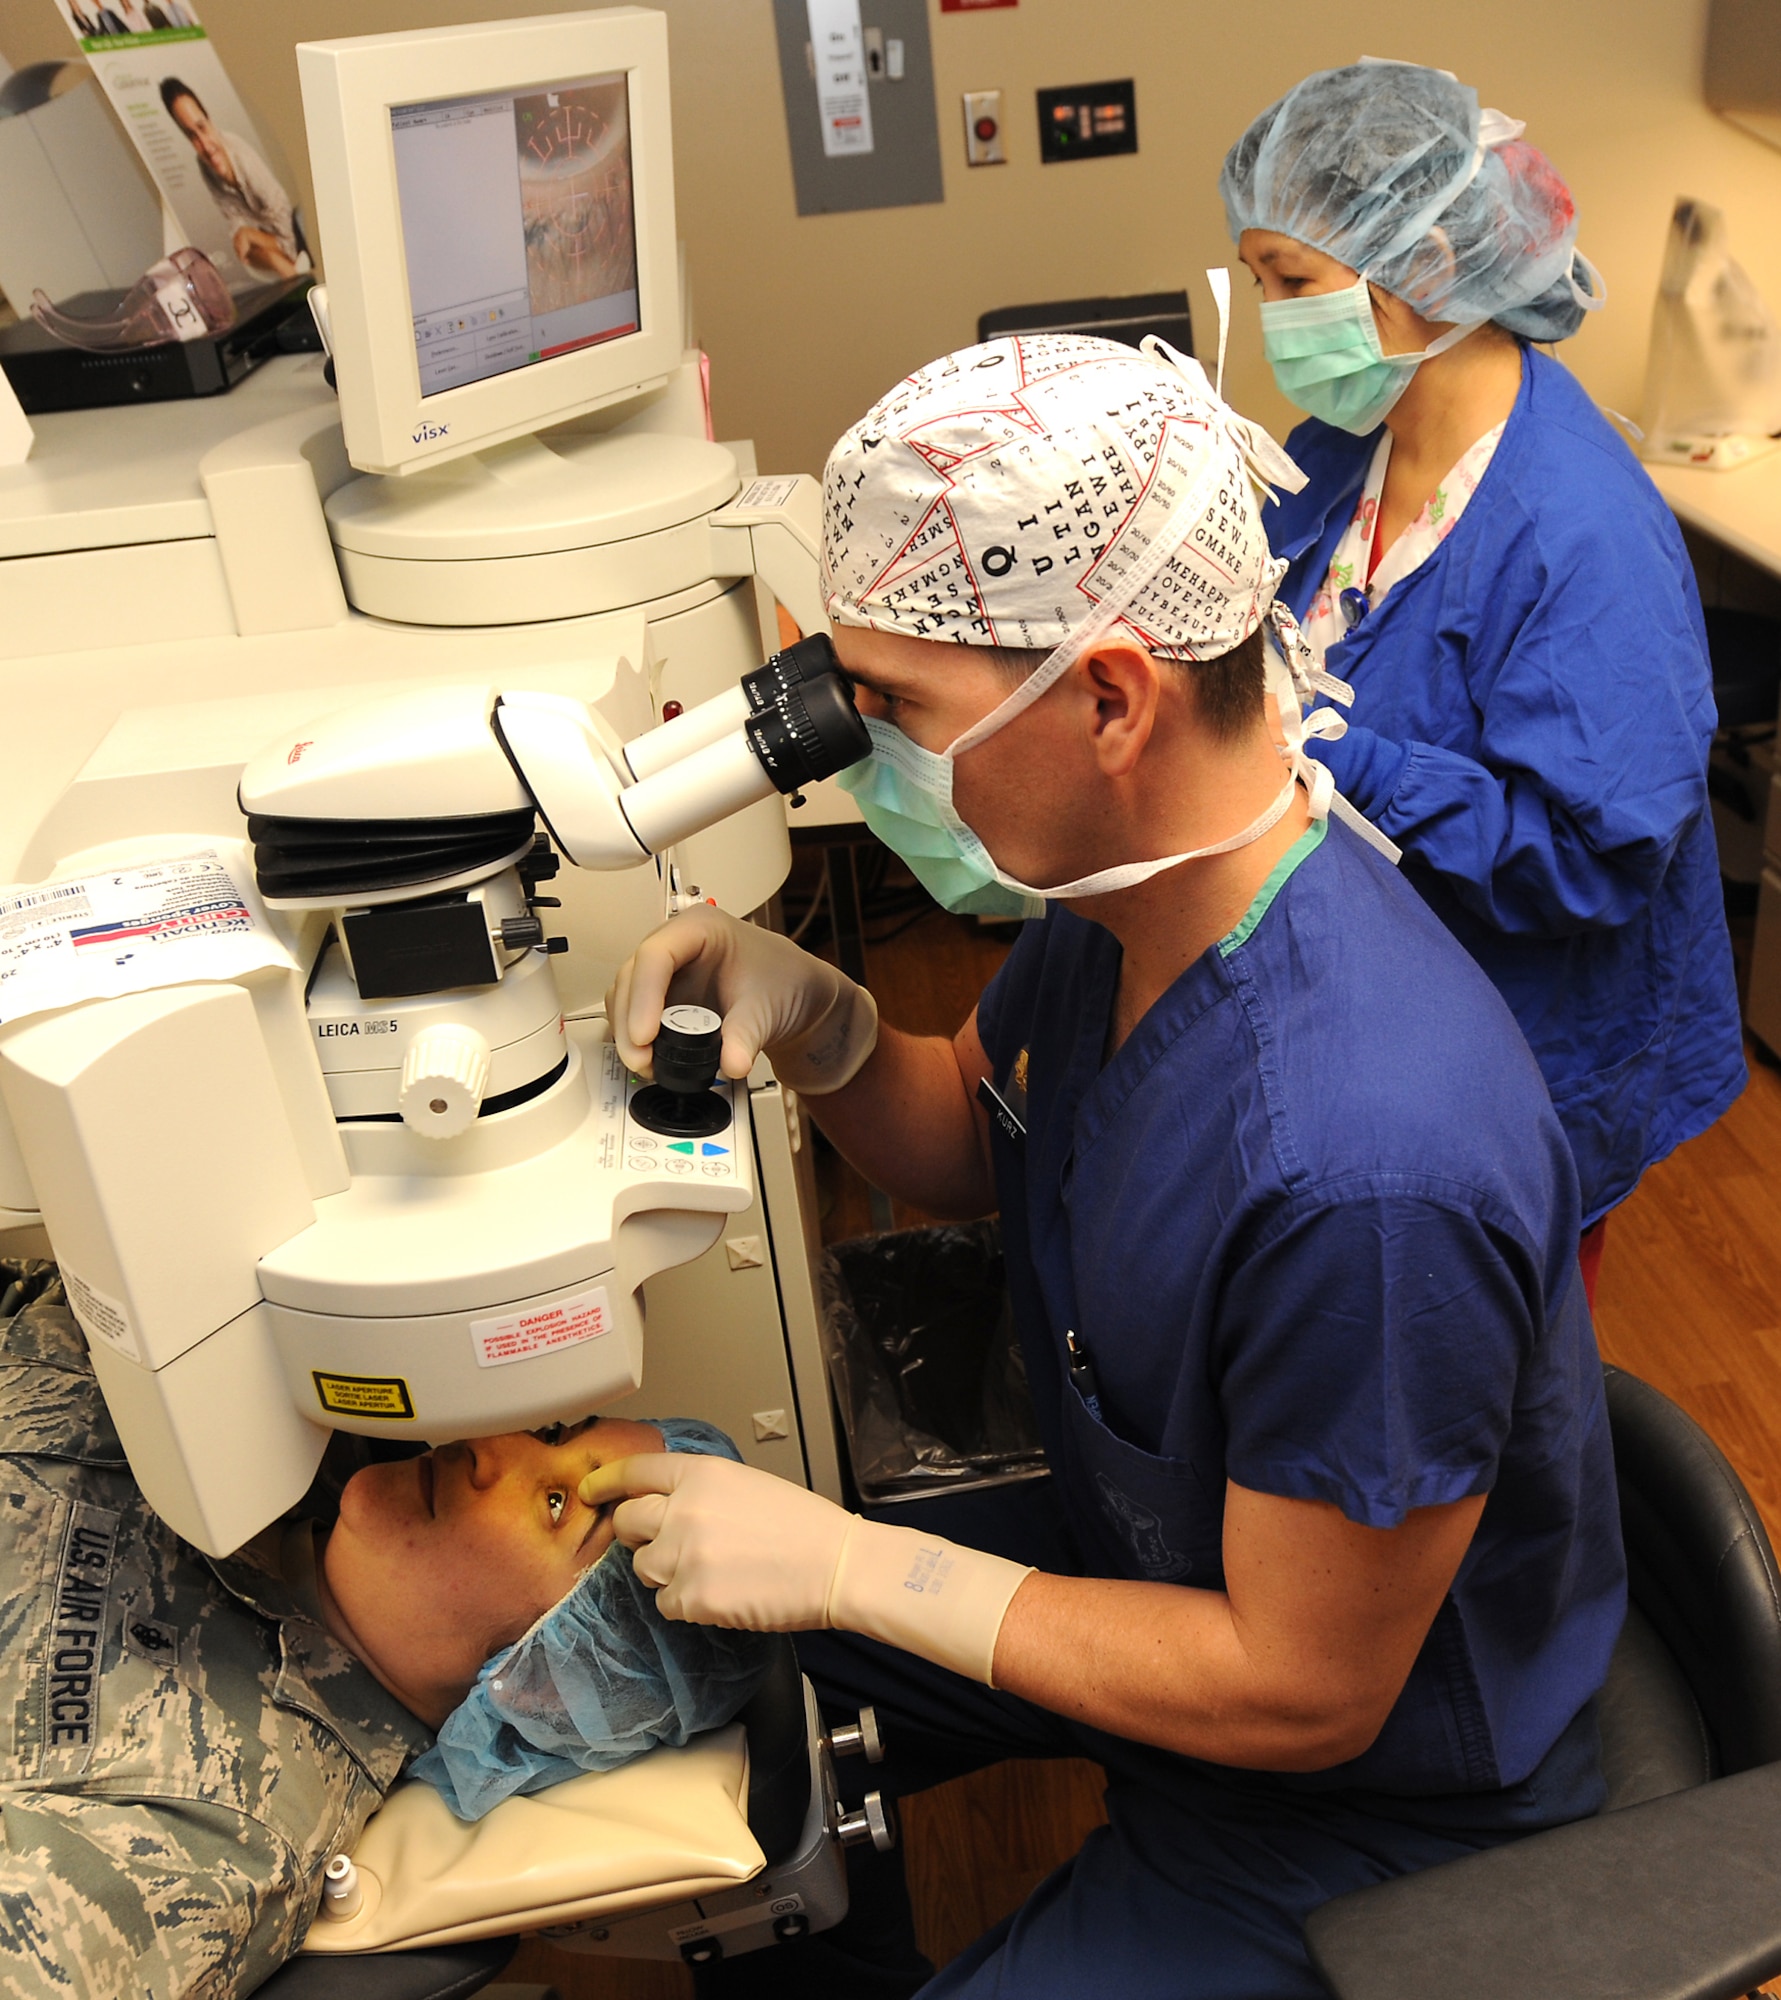 Dr. Christopher Kurz, a cornea and refractive surgeon, demonstrates the capabilities of the refractive surgery VISX Star S4 laser at David Grant USAF Medical Center, Dec. 7. (U.S. Air Force photo/Staff Sgt. Liliana Moreno)